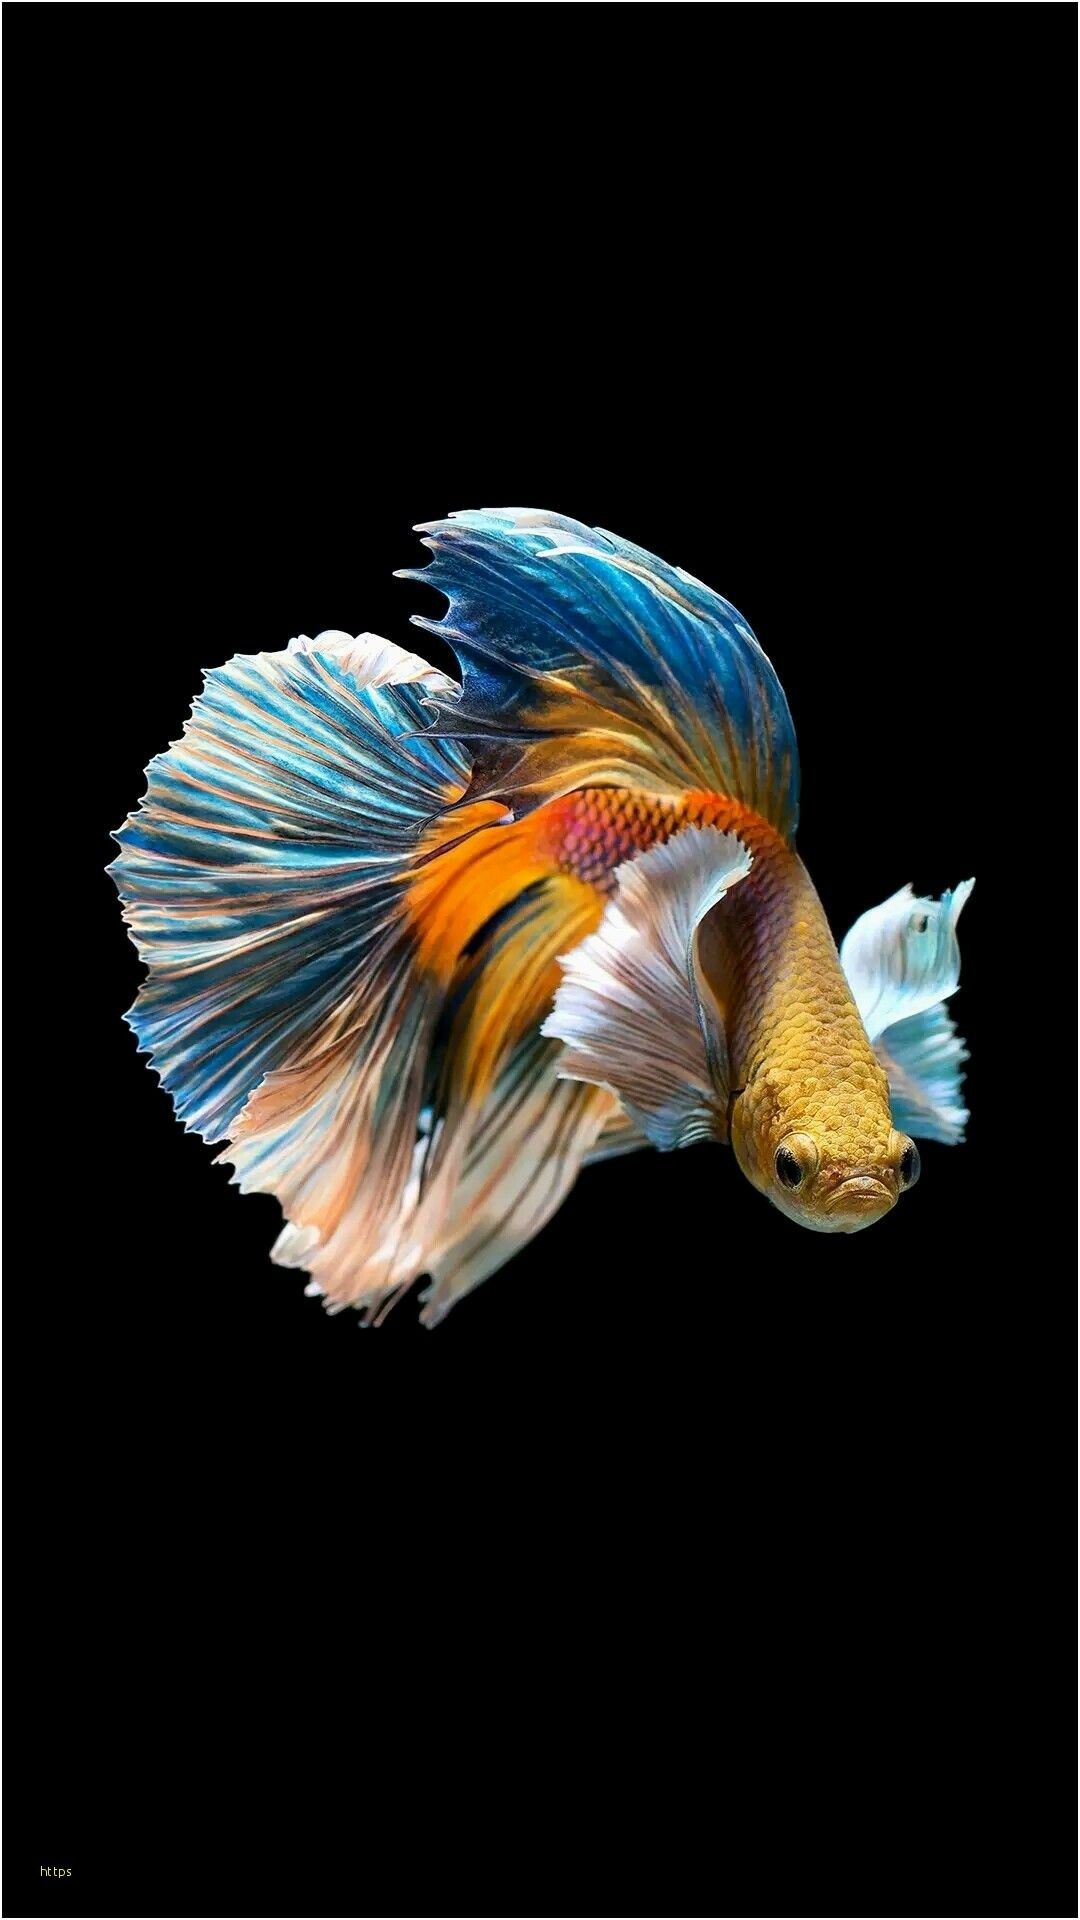 A colorful betta fish on a black background - Koi fish